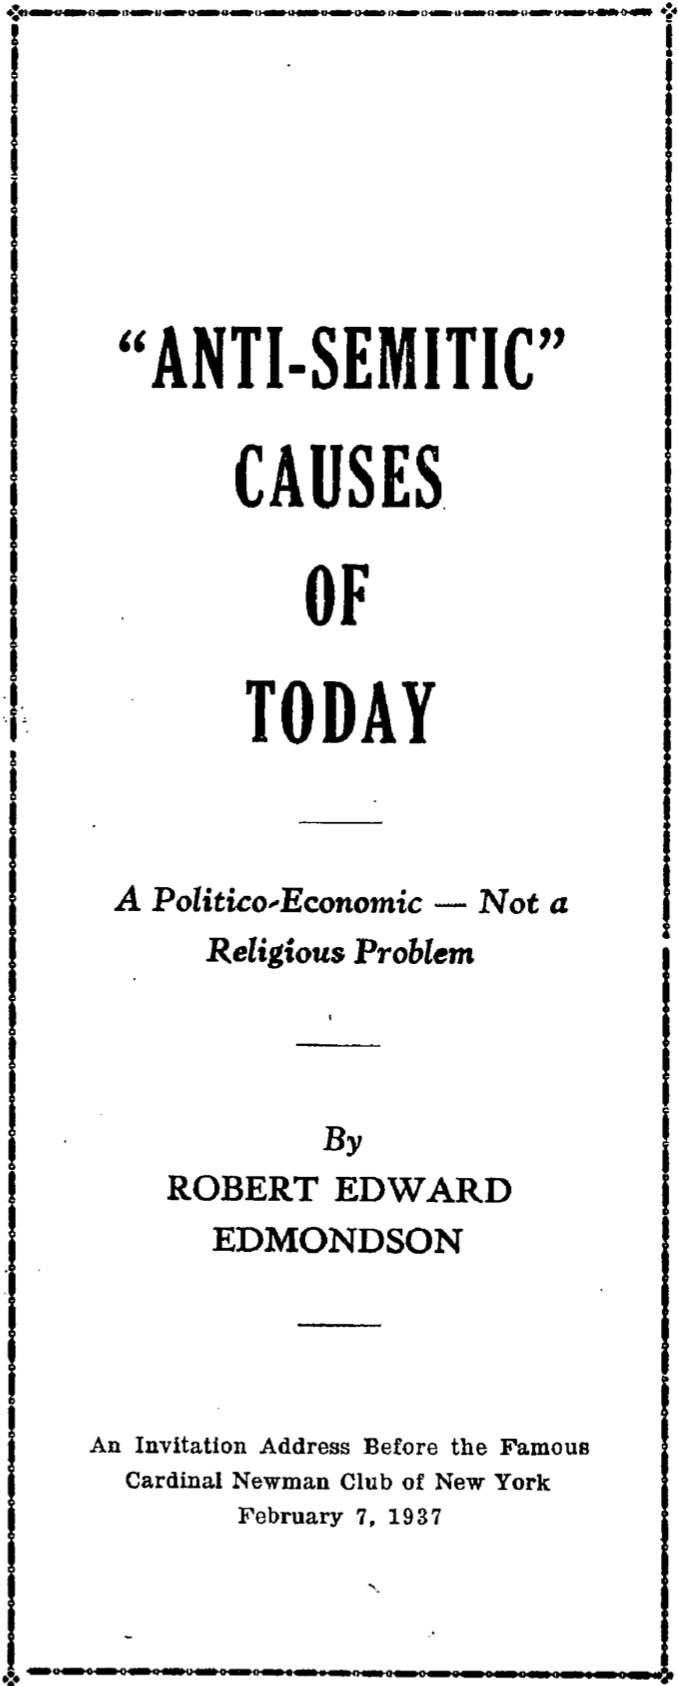 Anti-Semitic causes of today - A politico-economic, not a religious or racial Problem (1937) by Robert Edward Edmondson